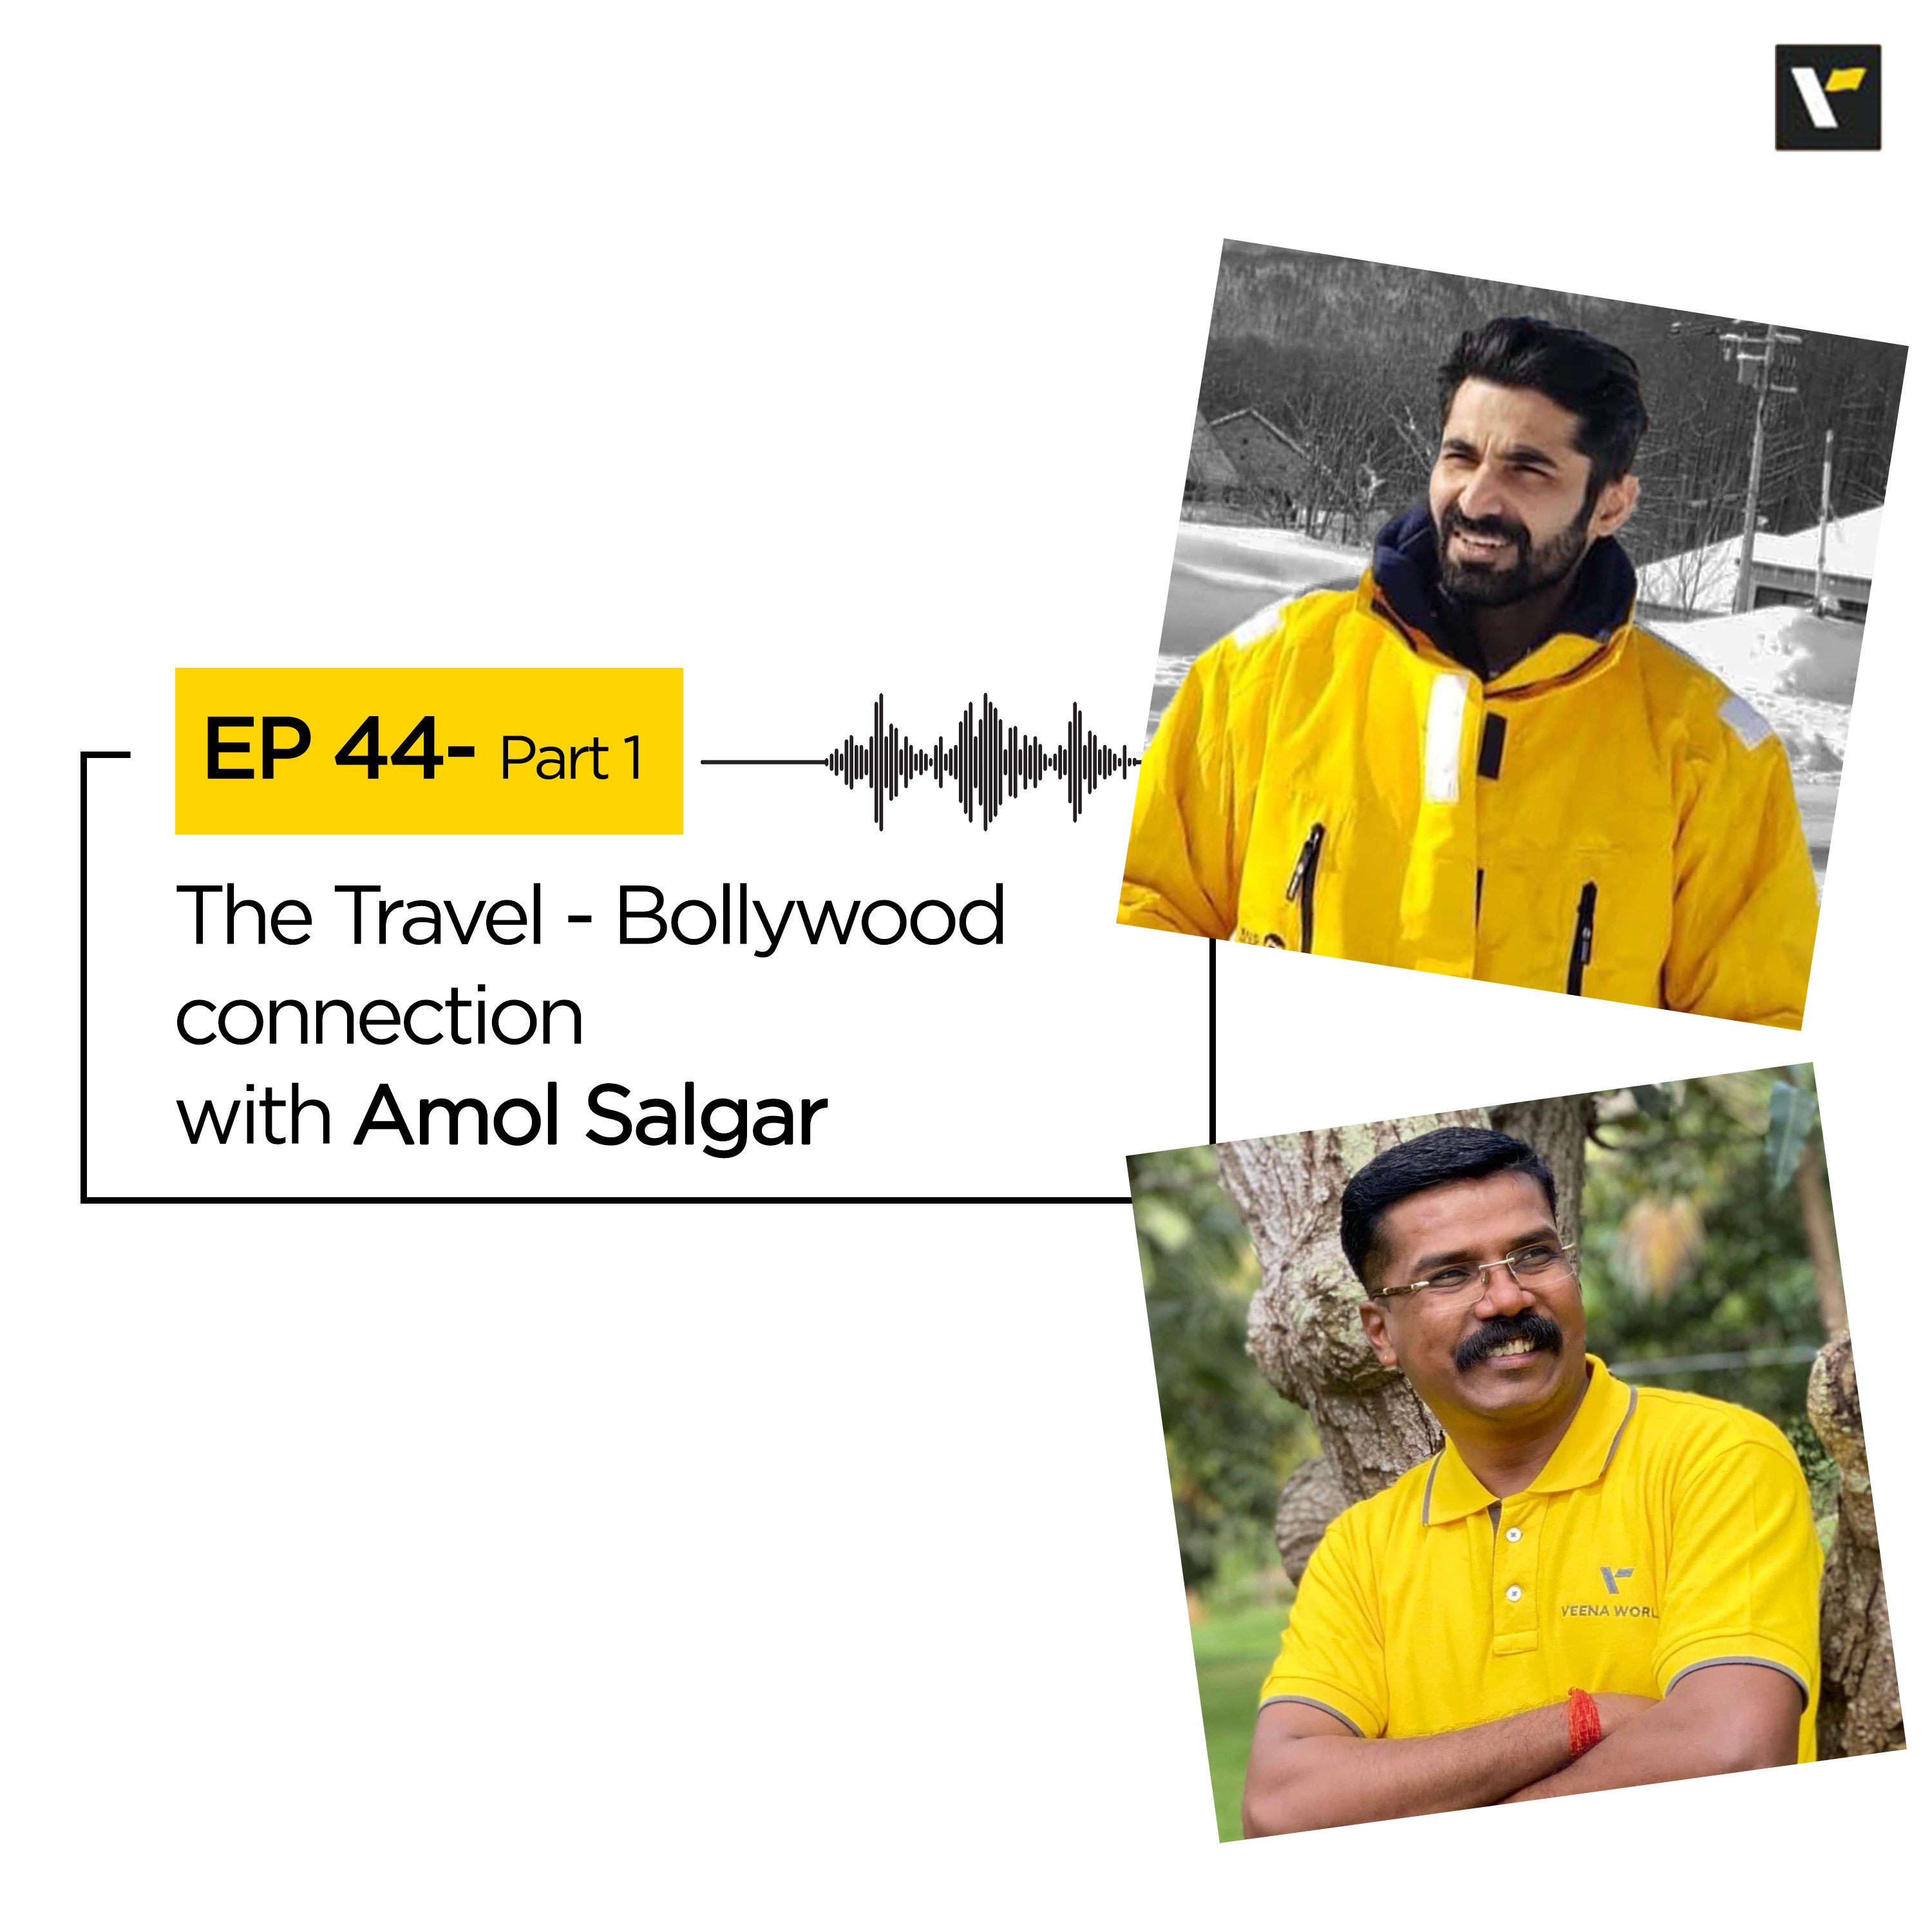 Ep 44 The Travel - Bollywood connection Part 1 | Travel Podcasts | Veena World